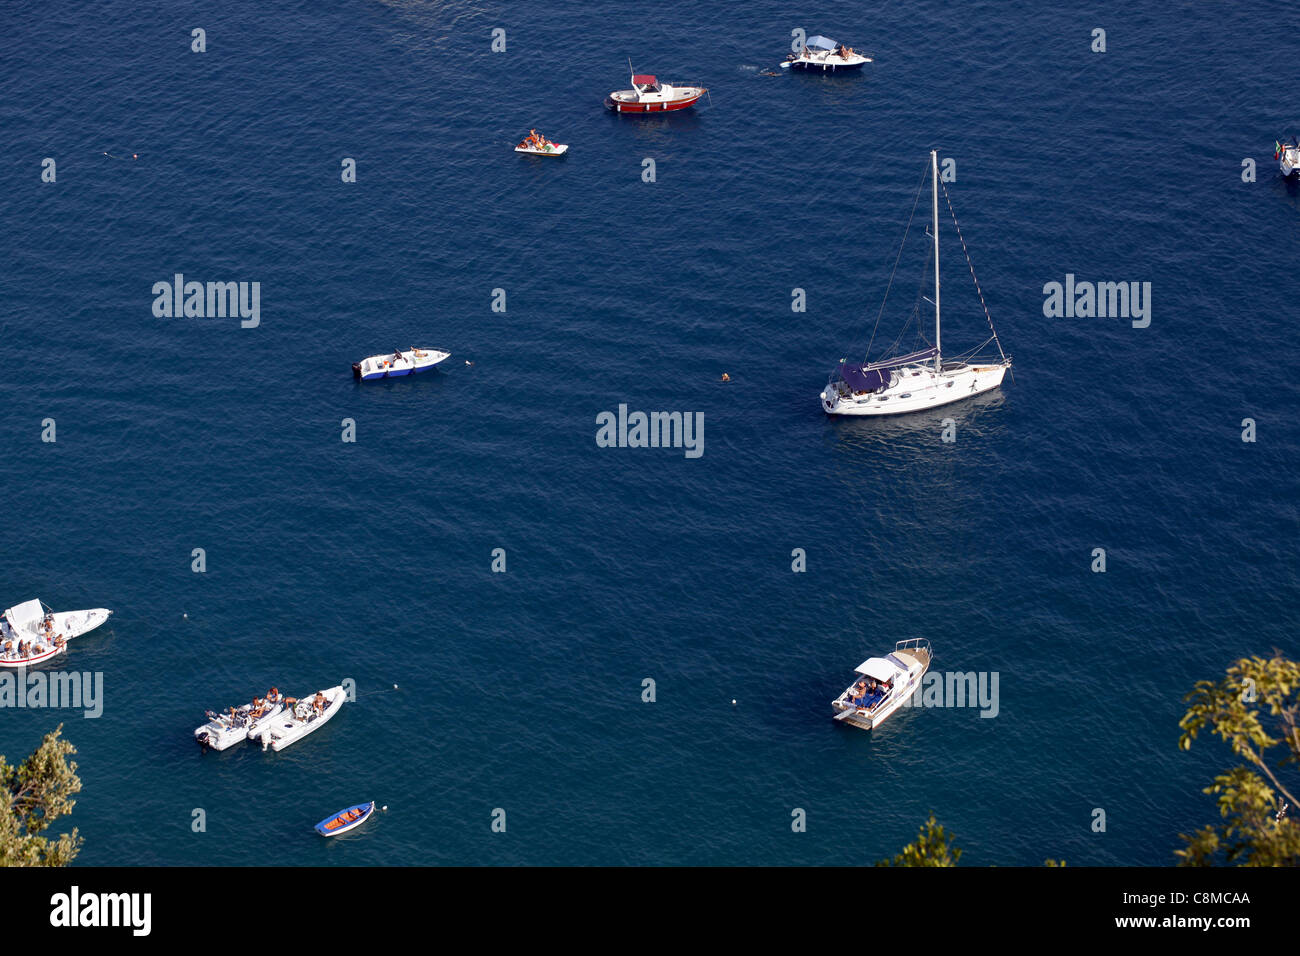 BOATS & YACHTS IN MEDITERRANEAN SEA ERCHIE ITALY 18 September 2011 Stock Photo